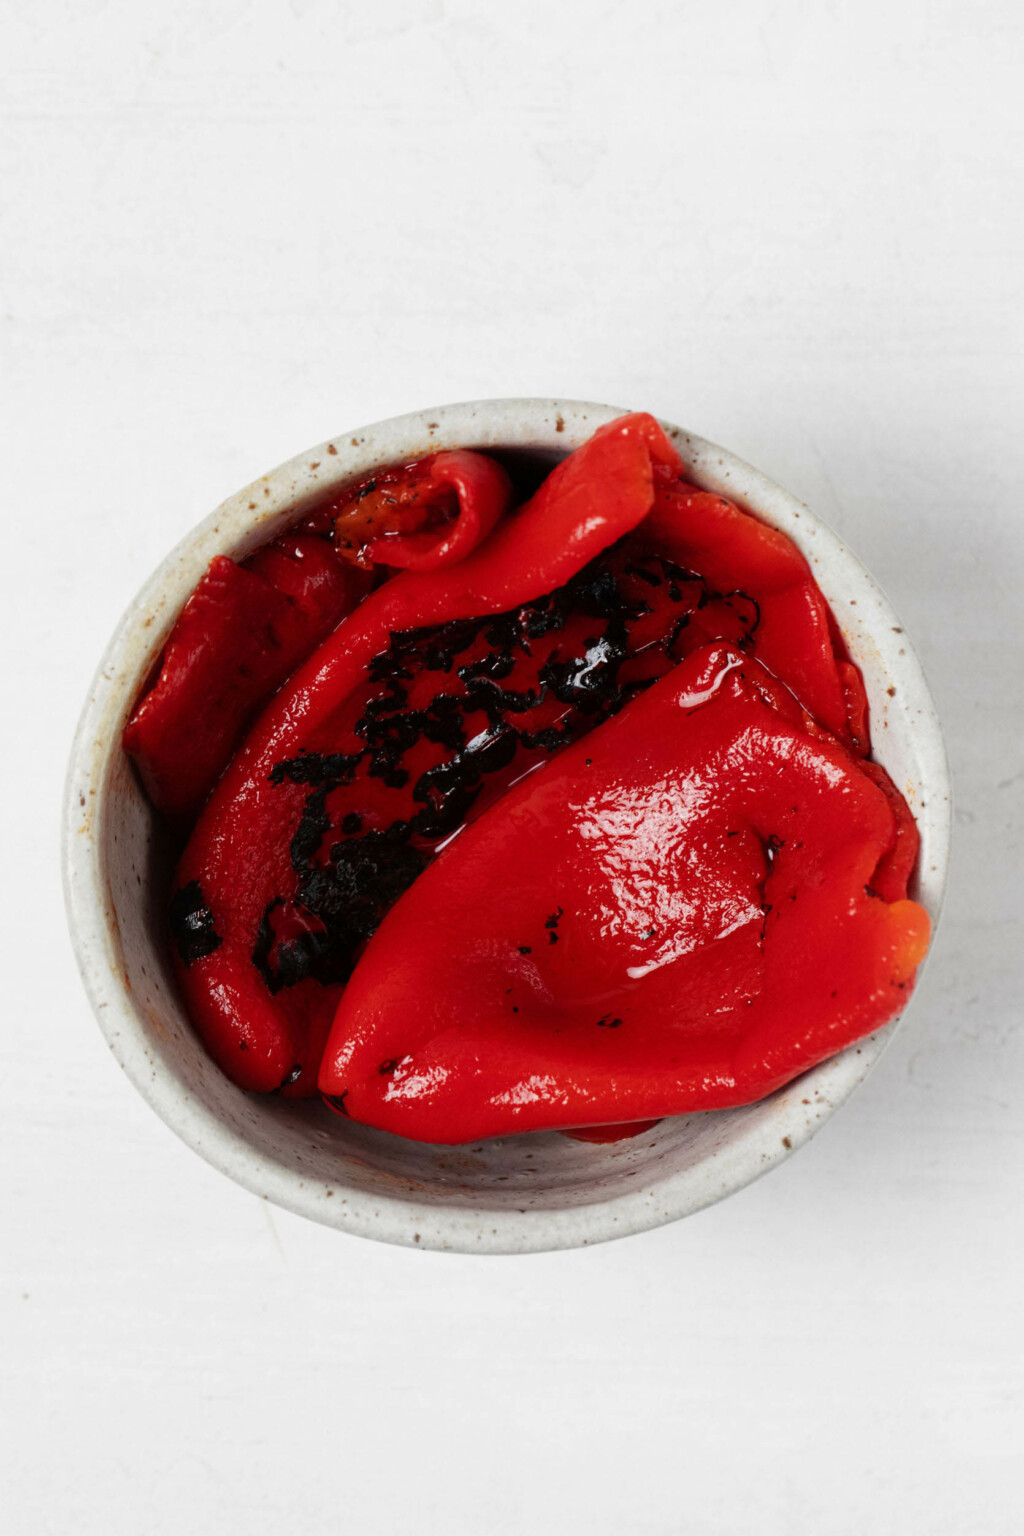 An overhead image of roasted red bell peppers, which are resting in a small pinch bowl.